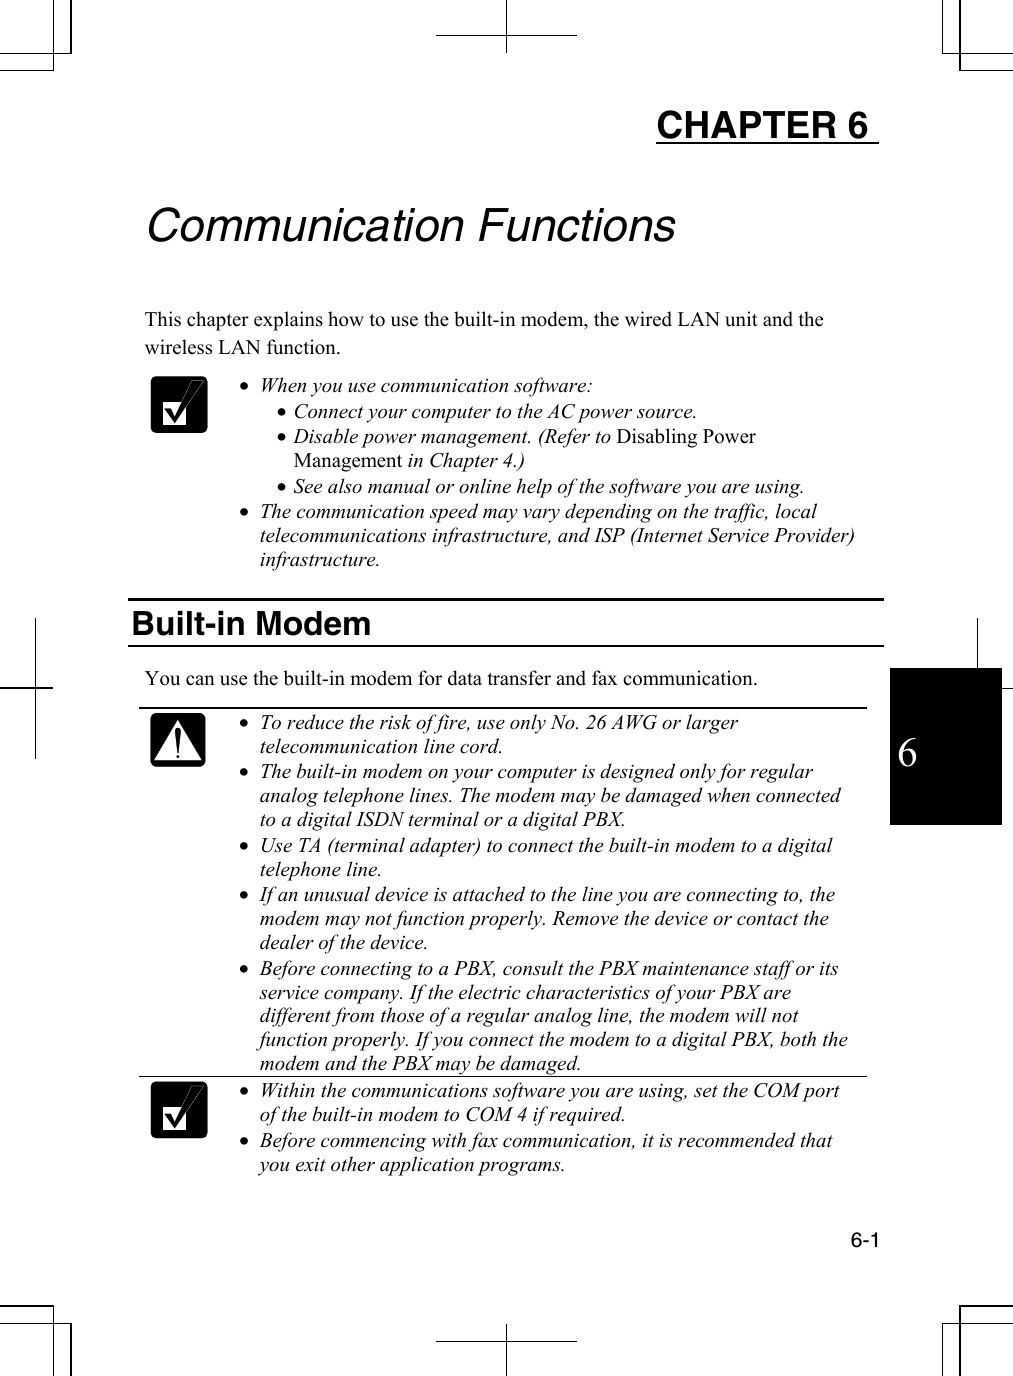  6-1 6 CHAPTER 6    Communication Functions  This chapter explains how to use the built-in modem, the wired LAN unit and the wireless LAN function.   •  When you use communication software: •  Connect your computer to the AC power source. •  Disable power management. (Refer to Disabling Power Management in Chapter 4.) •  See also manual or online help of the software you are using. •  The communication speed may vary depending on the traffic, local telecommunications infrastructure, and ISP (Internet Service Provider) infrastructure.  Built-in Modem   You can use the built-in modem for data transfer and fax communication.    •  To reduce the risk of fire, use only No. 26 AWG or larger telecommunication line cord. •  The built-in modem on your computer is designed only for regular analog telephone lines. The modem may be damaged when connected to a digital ISDN terminal or a digital PBX. •  Use TA (terminal adapter) to connect the built-in modem to a digital telephone line. •  If an unusual device is attached to the line you are connecting to, the modem may not function properly. Remove the device or contact the dealer of the device. •  Before connecting to a PBX, consult the PBX maintenance staff or its service company. If the electric characteristics of your PBX are different from those of a regular analog line, the modem will not function properly. If you connect the modem to a digital PBX, both the modem and the PBX may be damaged.   •  Within the communications software you are using, set the COM port of the built-in modem to COM 4 if required. •  Before commencing with fax communication, it is recommended that you exit other application programs. 